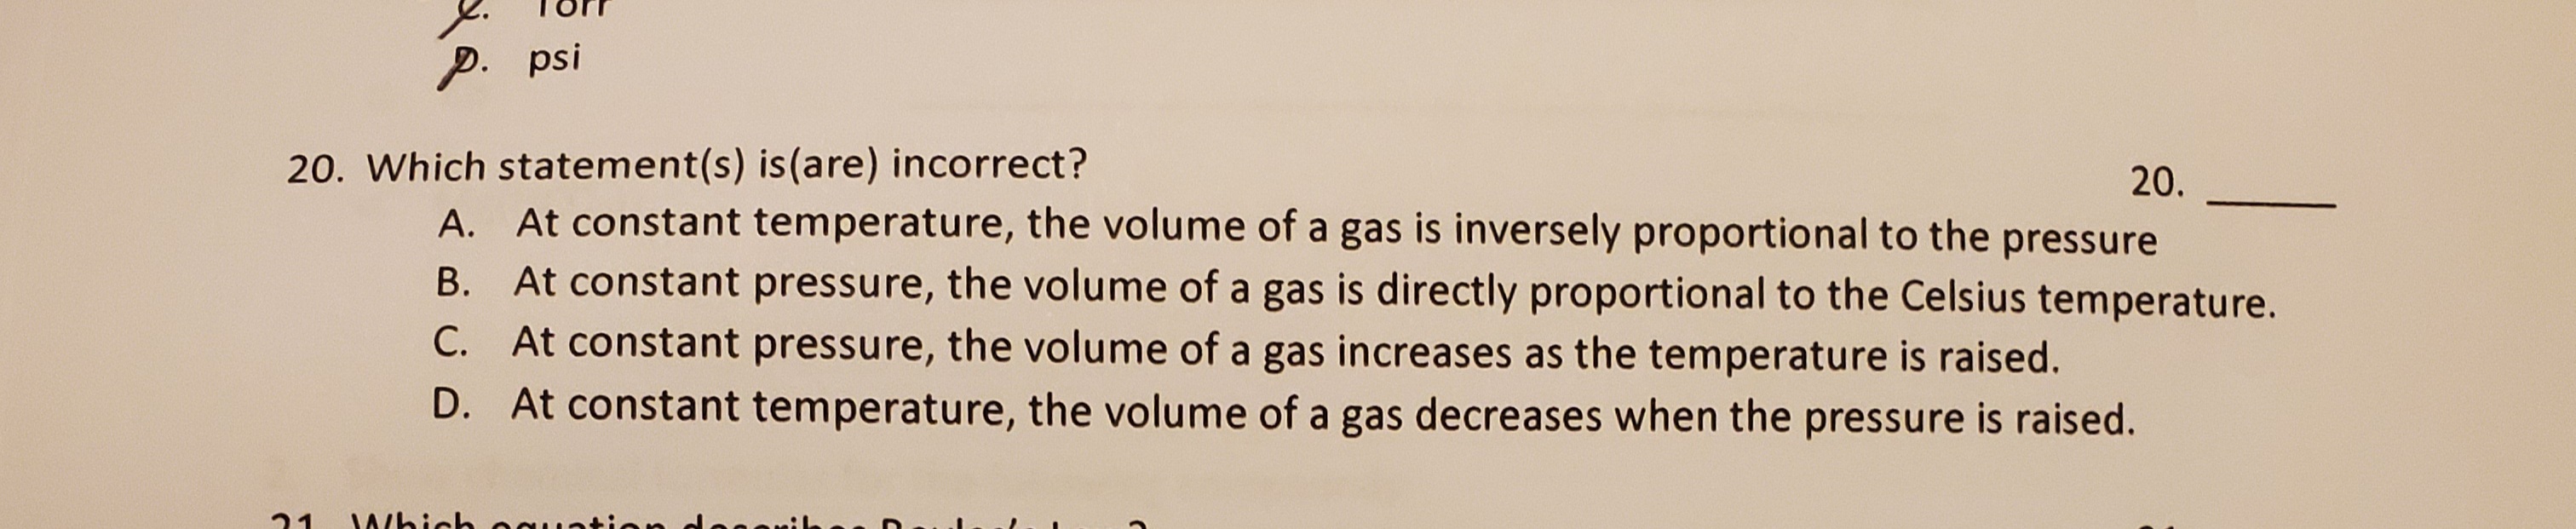 Which statement(s) is(are) incorrect?
A. At constant temperature, the volume of a gas is inversely proportional to the pressure
B. At constant pressure, the volume of a gas is directly proportional to the Celsius temperature.
C. At constant pressure, the volume of a gas increases as the temperature is raised.
D. At constant temperature, the volume of a gas decreases when the pressure is raised.
20.
